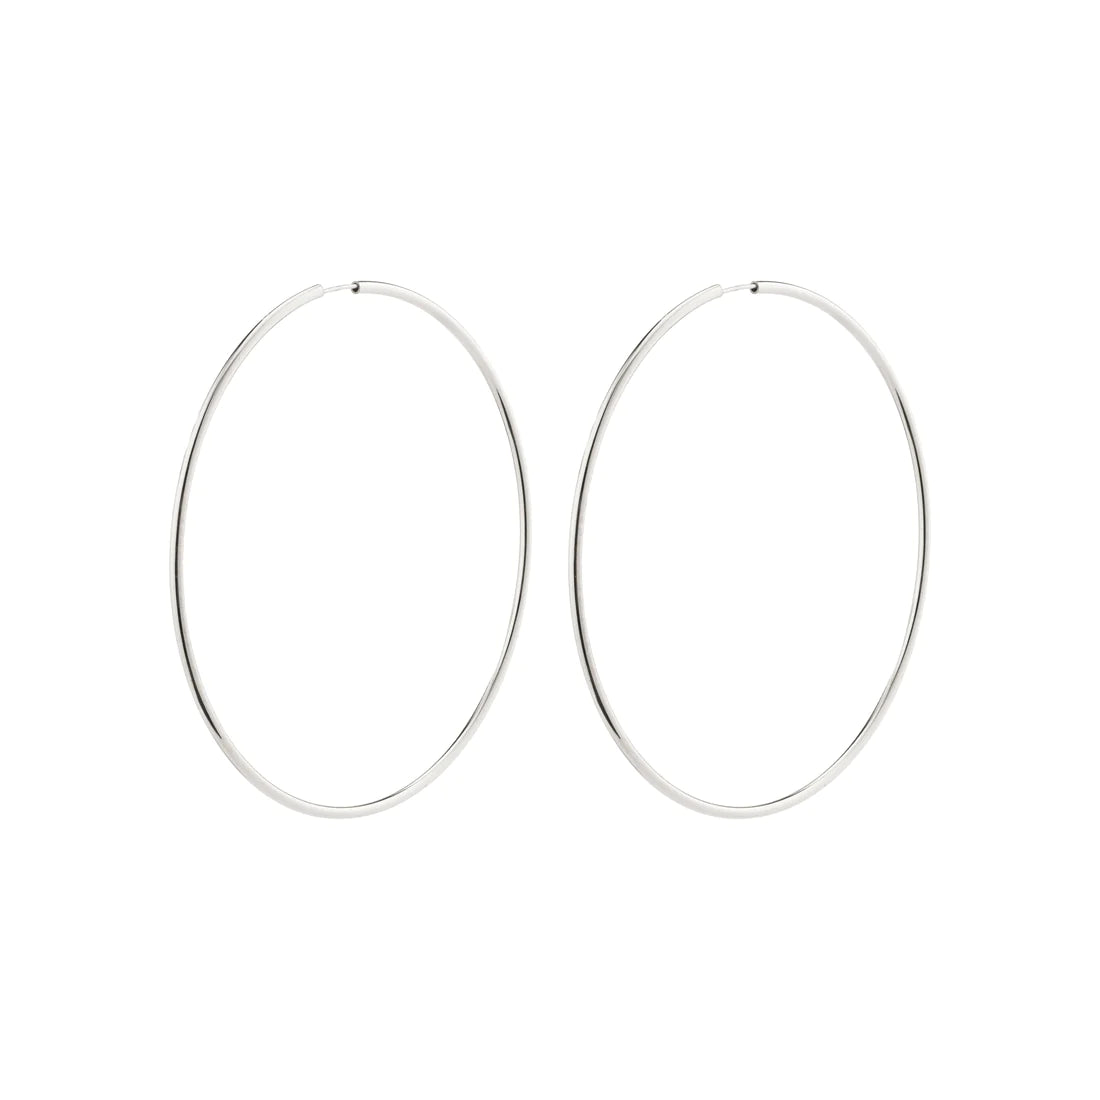 April Recycled Maxi Hoop Earring